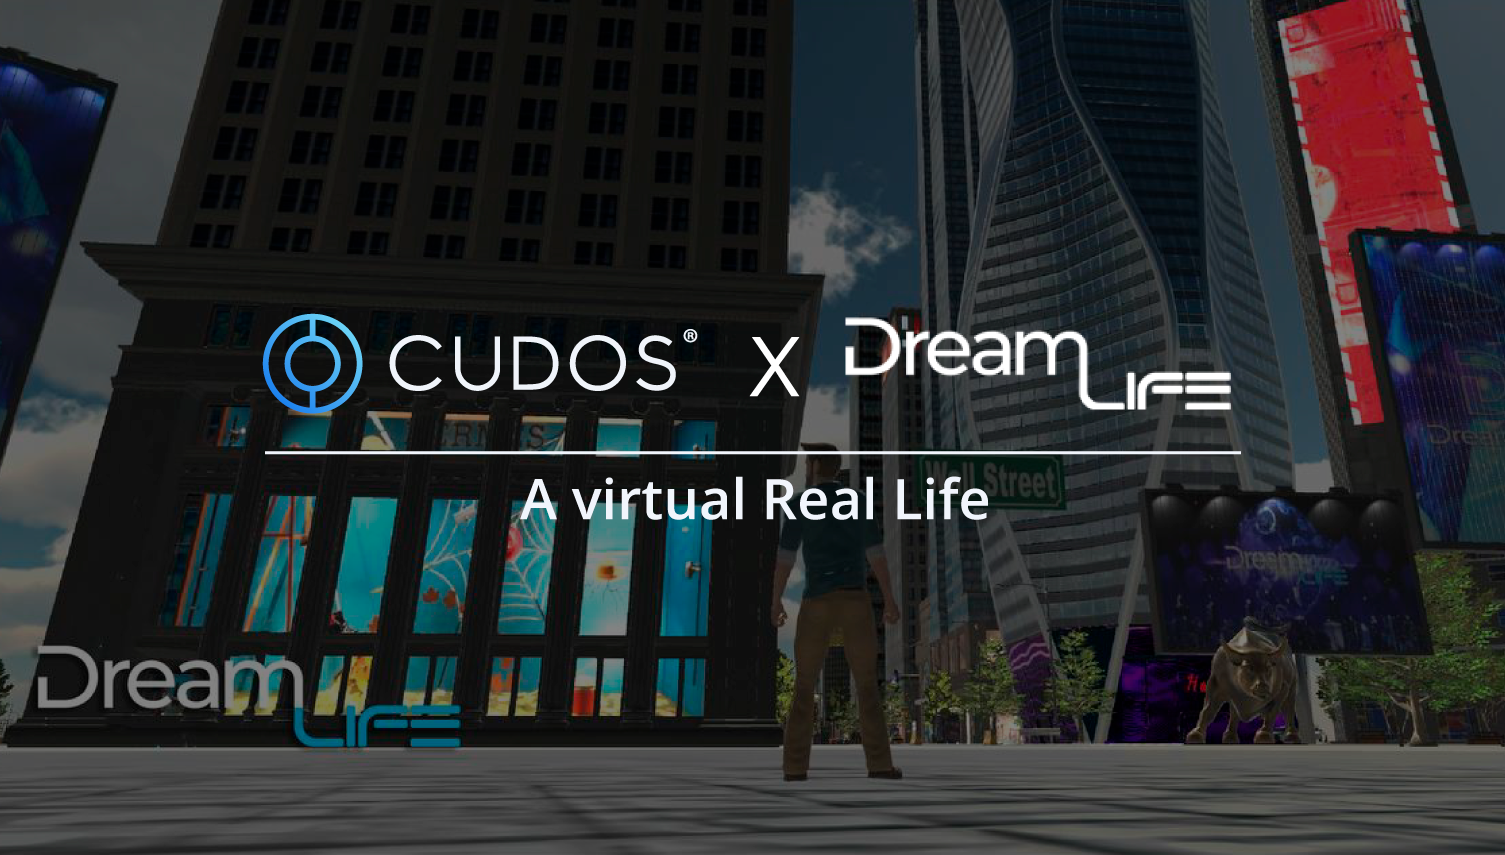 Dream VR chooses to build on Cudos to design an all-in-one metaverse